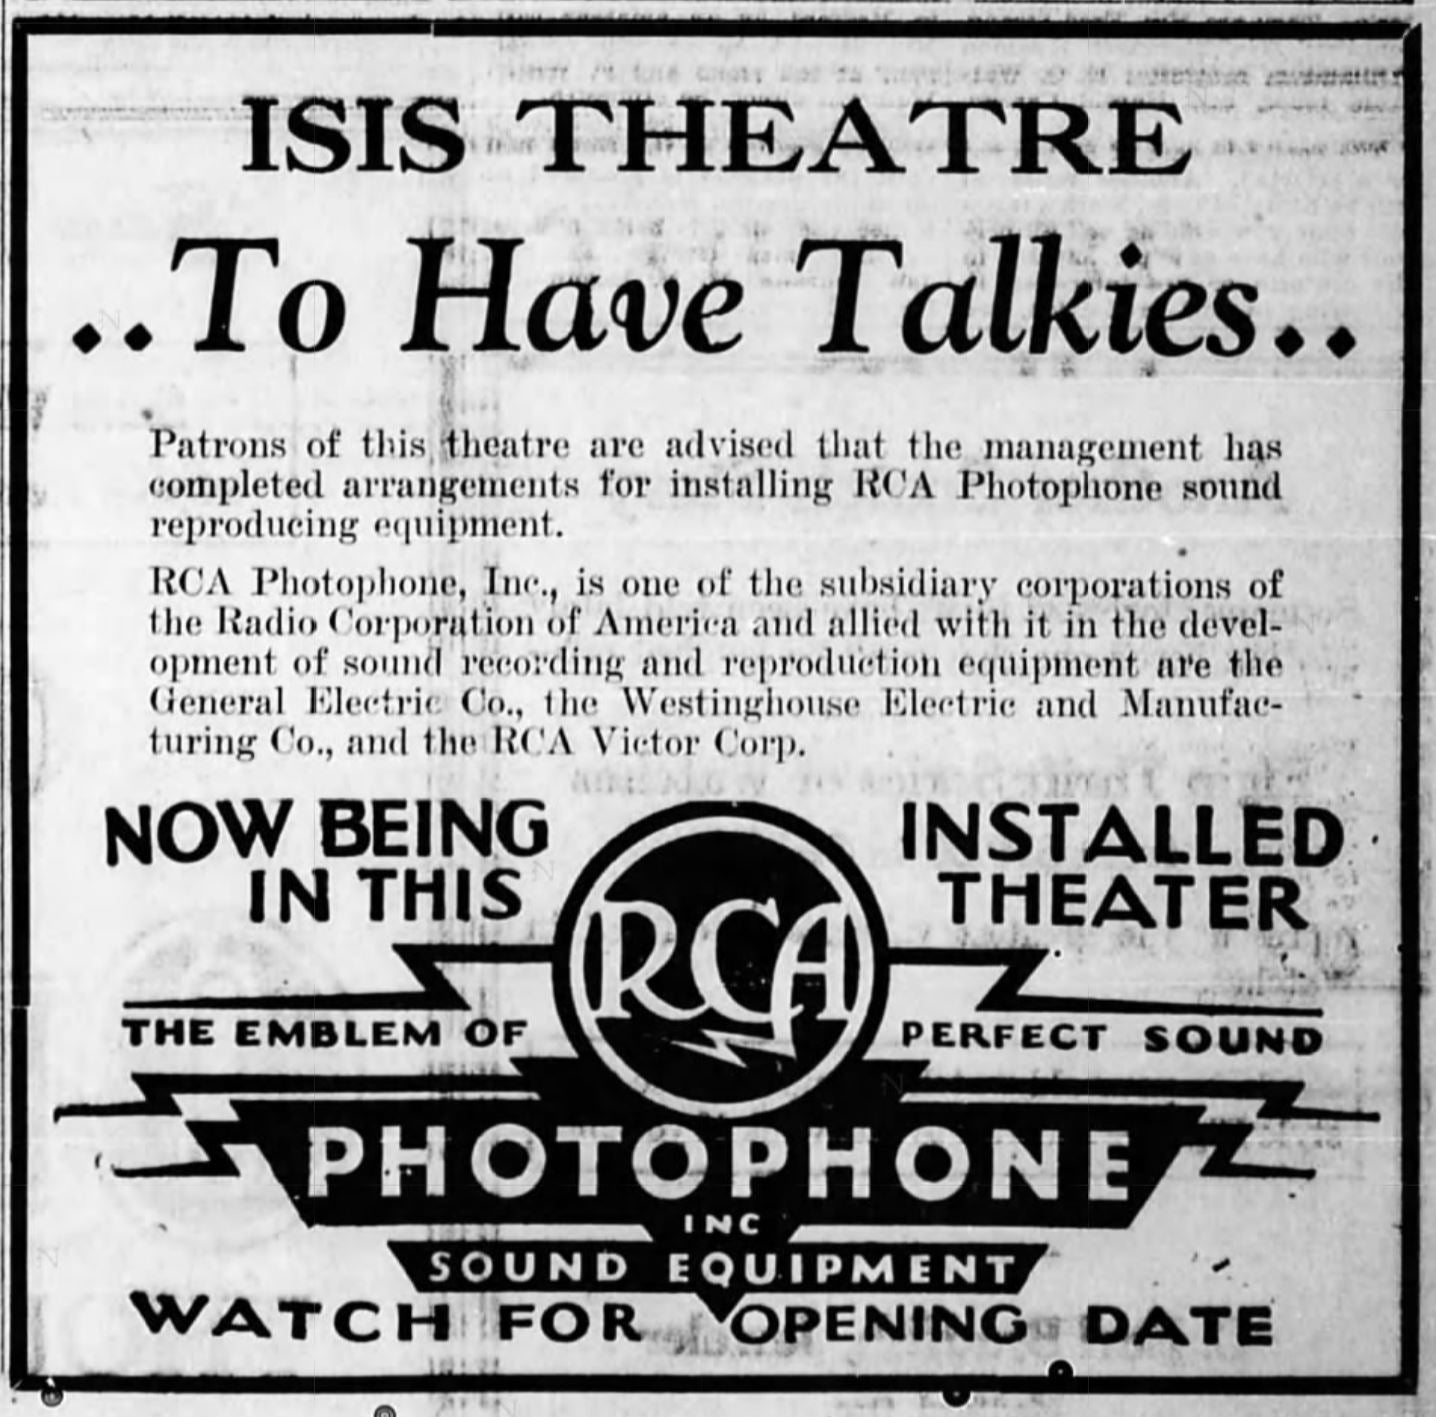 Sound at the Isis theater, 1930